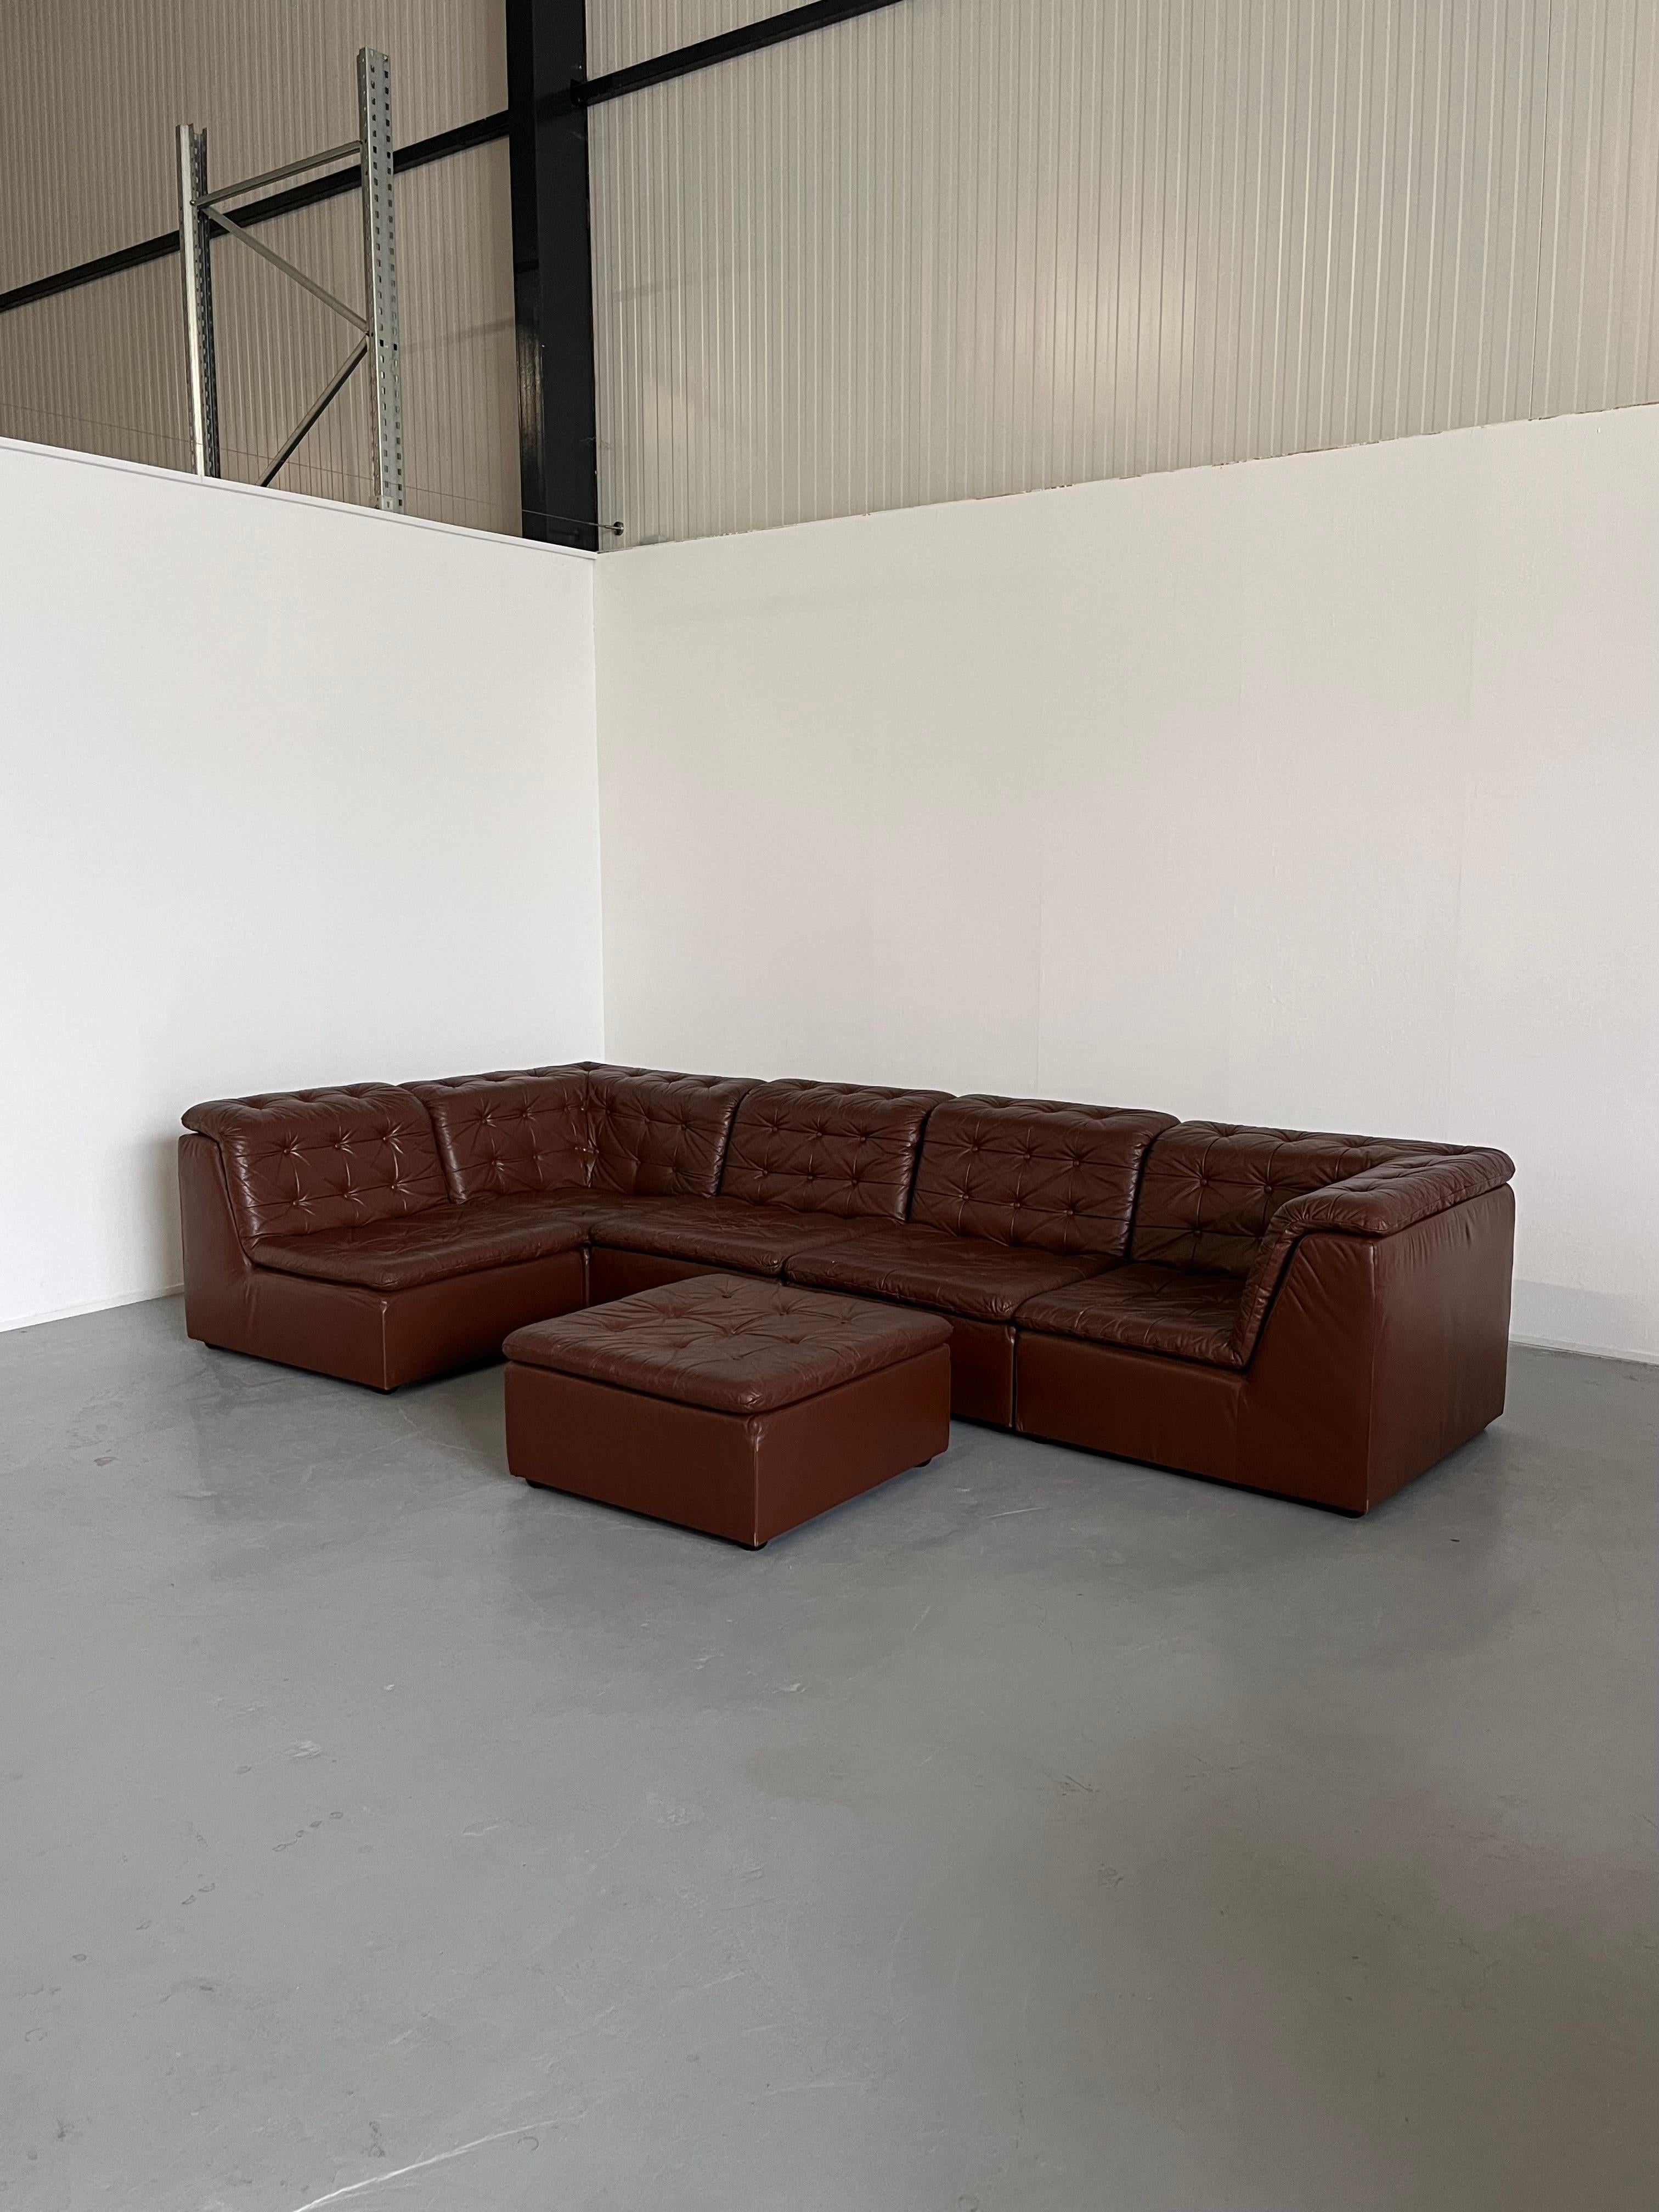 A stunning six-part Mid-Century Modern patchwork cognac brown leather sectional sofa, produced in the late 1970s by Laauser, currently one of the most popular manufacturers on the vintage market for modular and sectional sofas.
A 1970s statement of